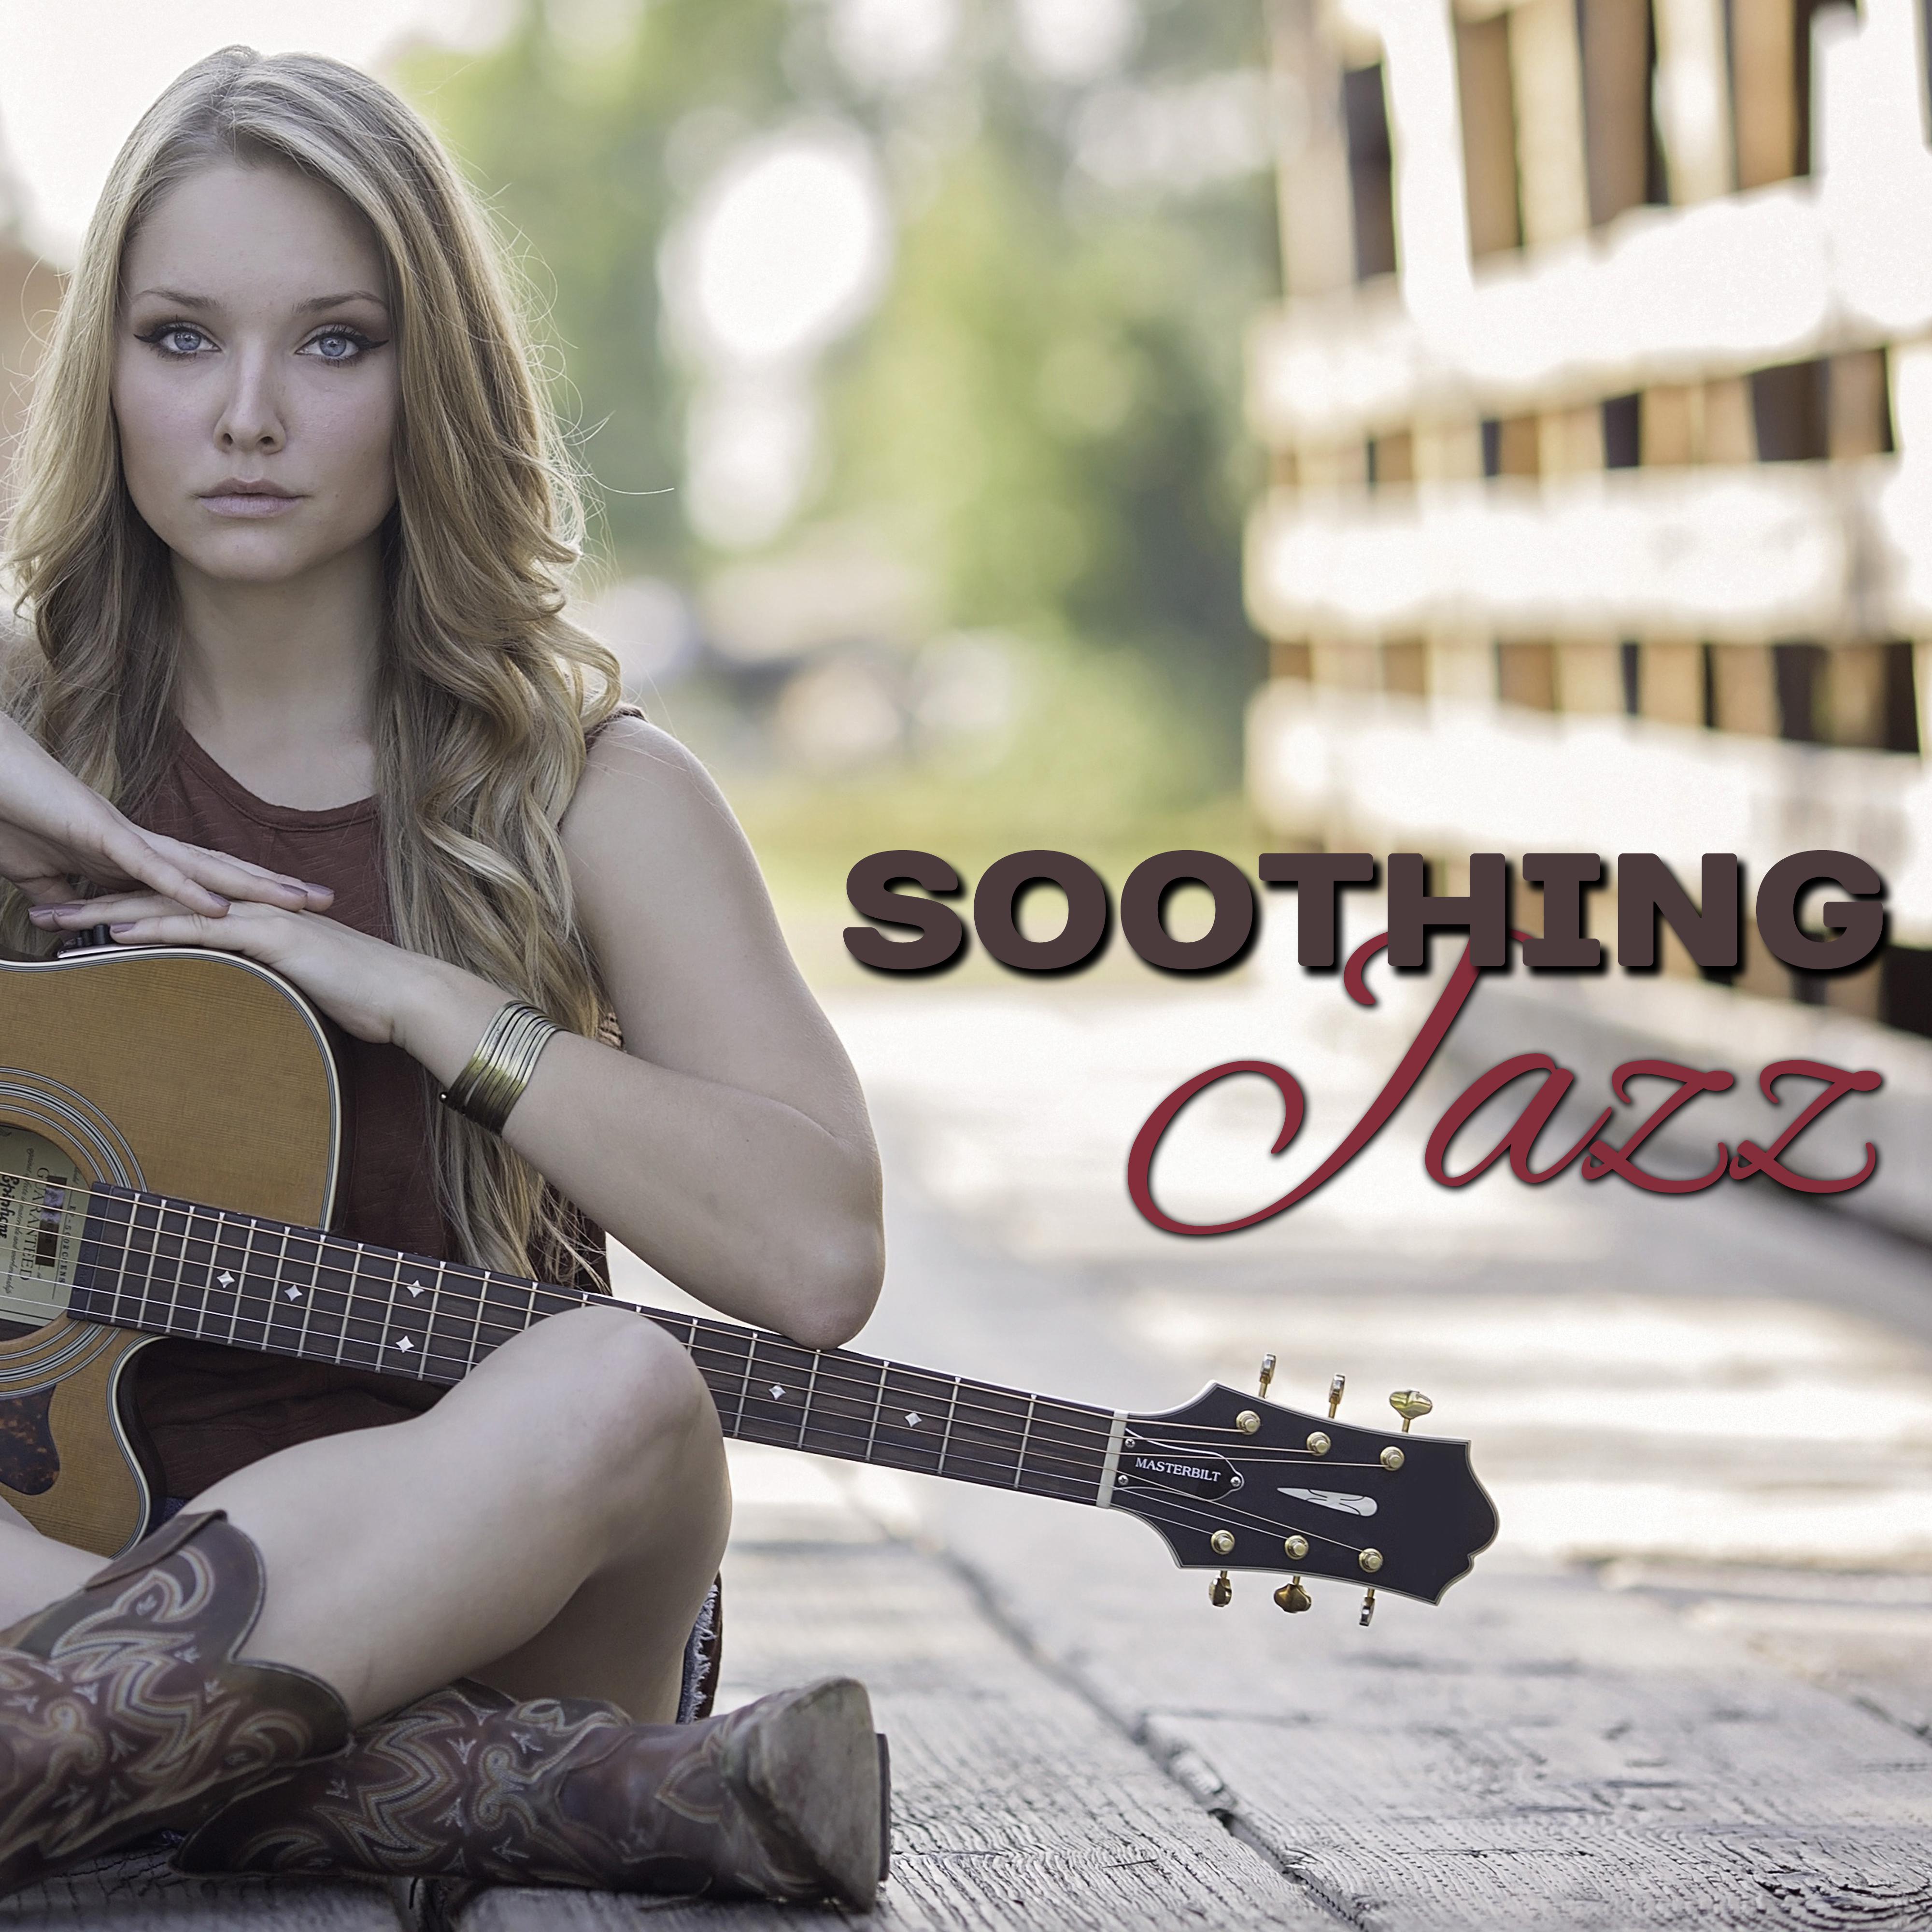 Soothing Jazz  Best Smooth Jazz for Relaxation, Piano Bar, Night Sounds, Chilled Jazz, Instrumental Sounds, Lazy Night